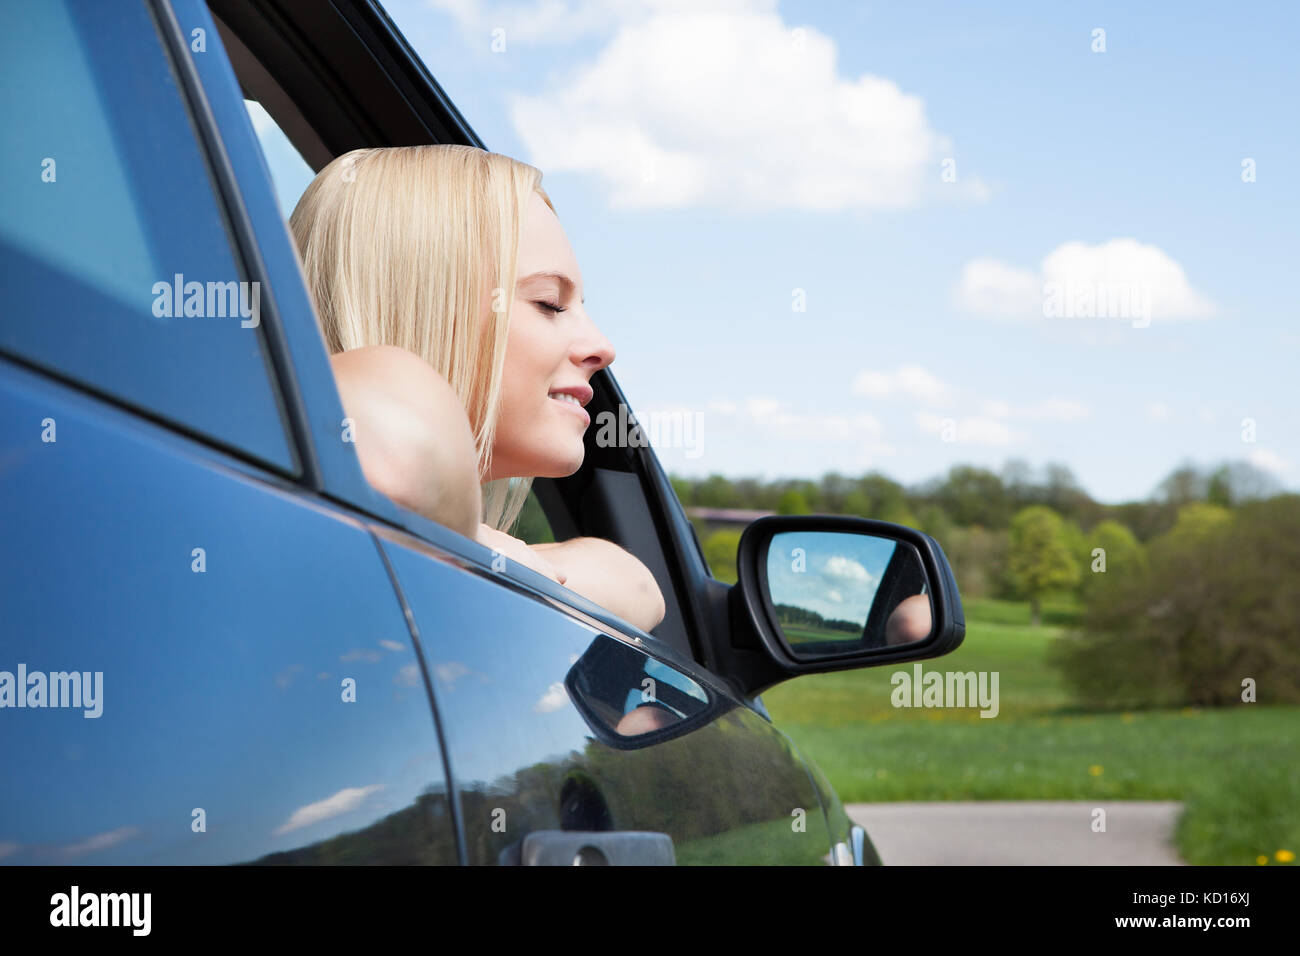 Portrait of happy young blonde woman leaning on car window Banque D'Images